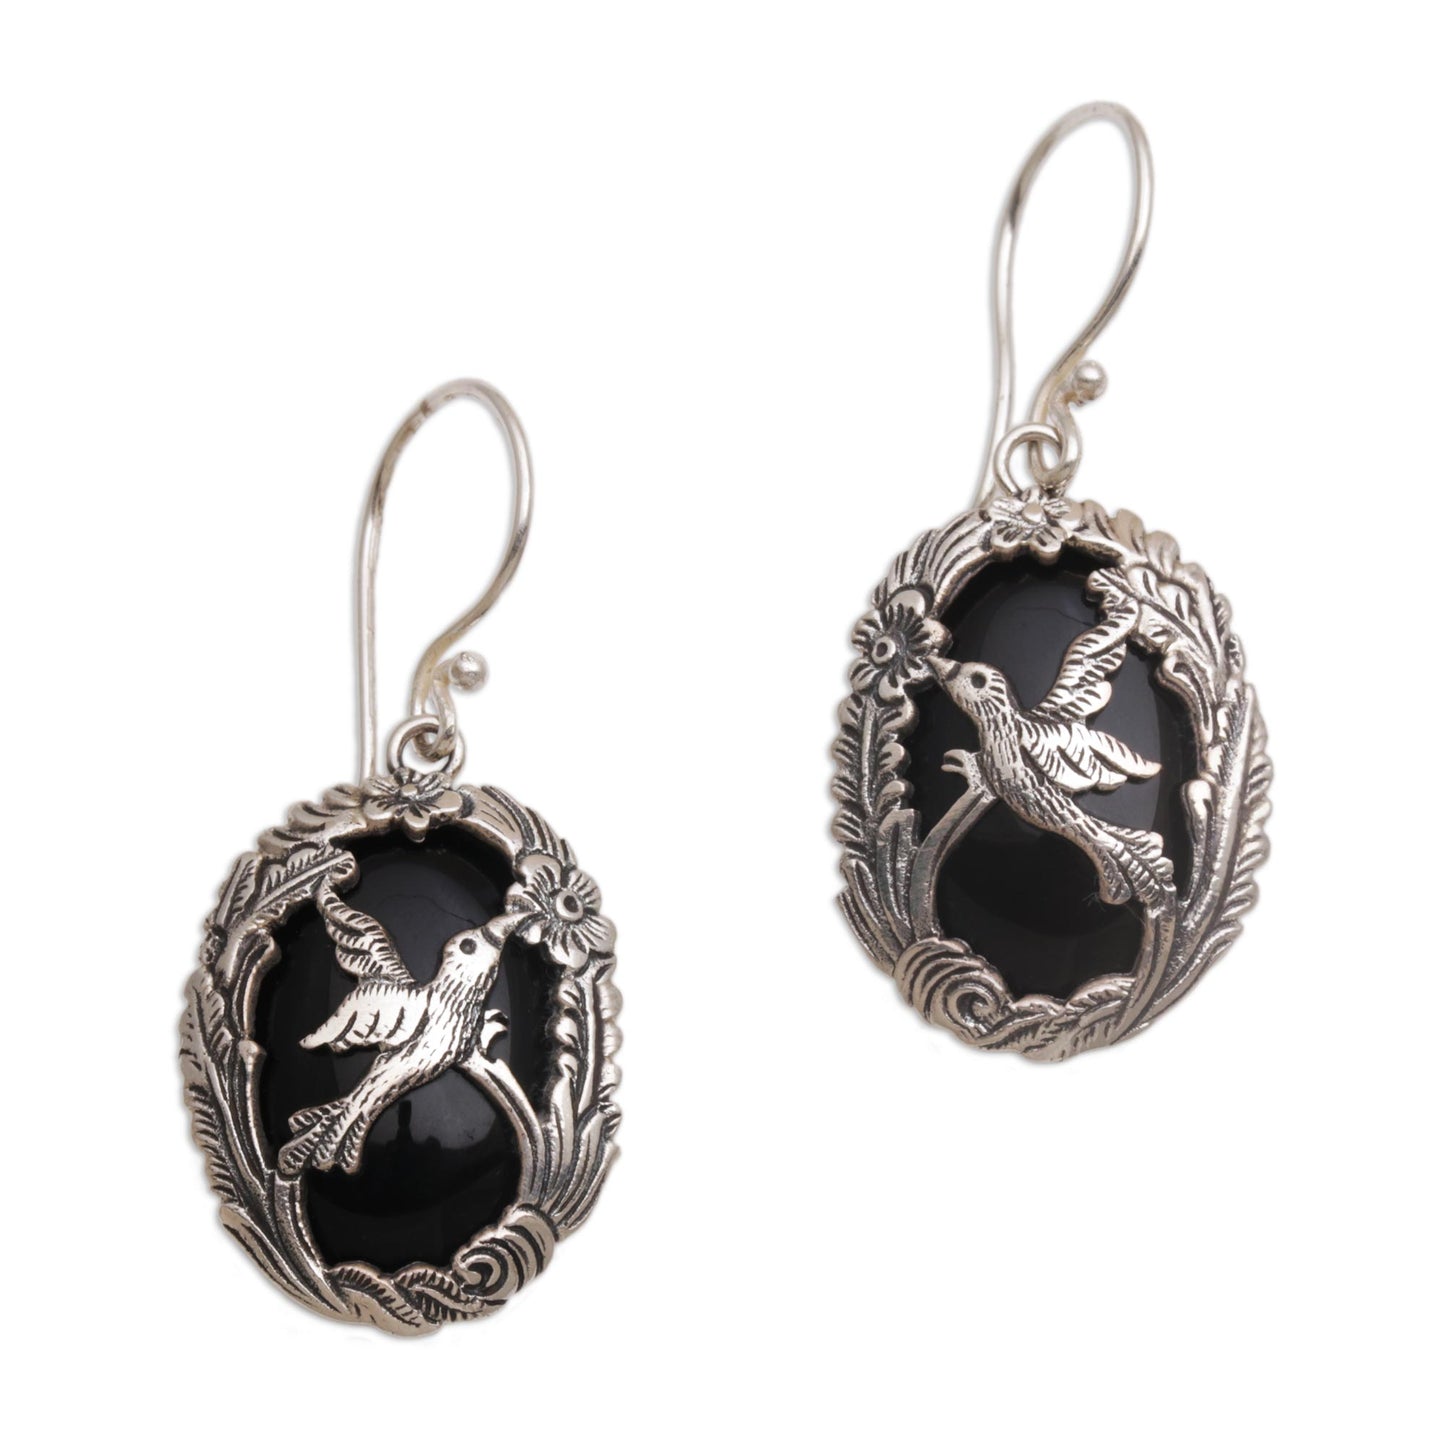 Nature's Freedom Onyx and 925 Silver Bird-Themed Dangle Earrings from Bali